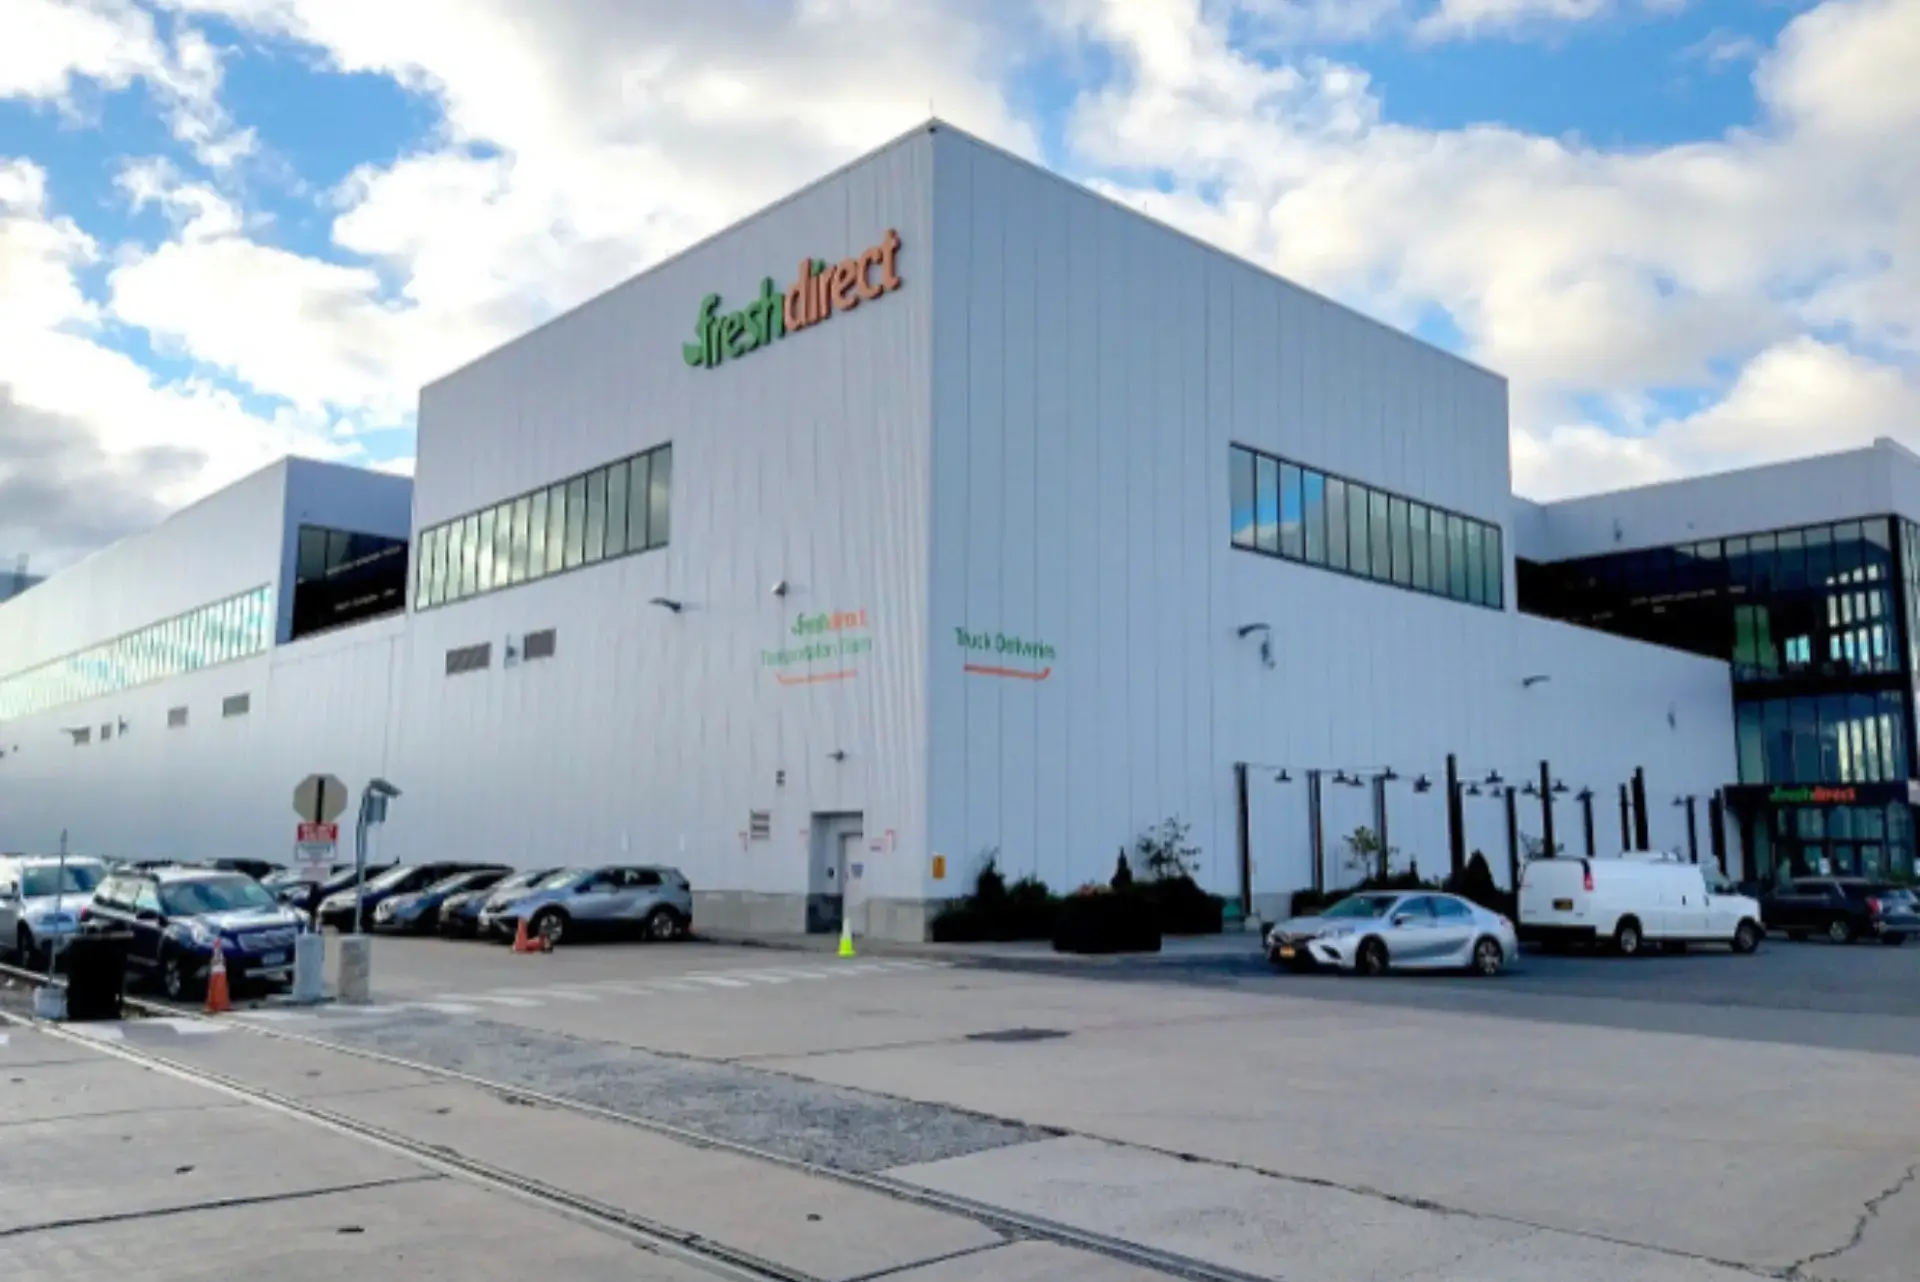 The headquarters building to the company freshdirect